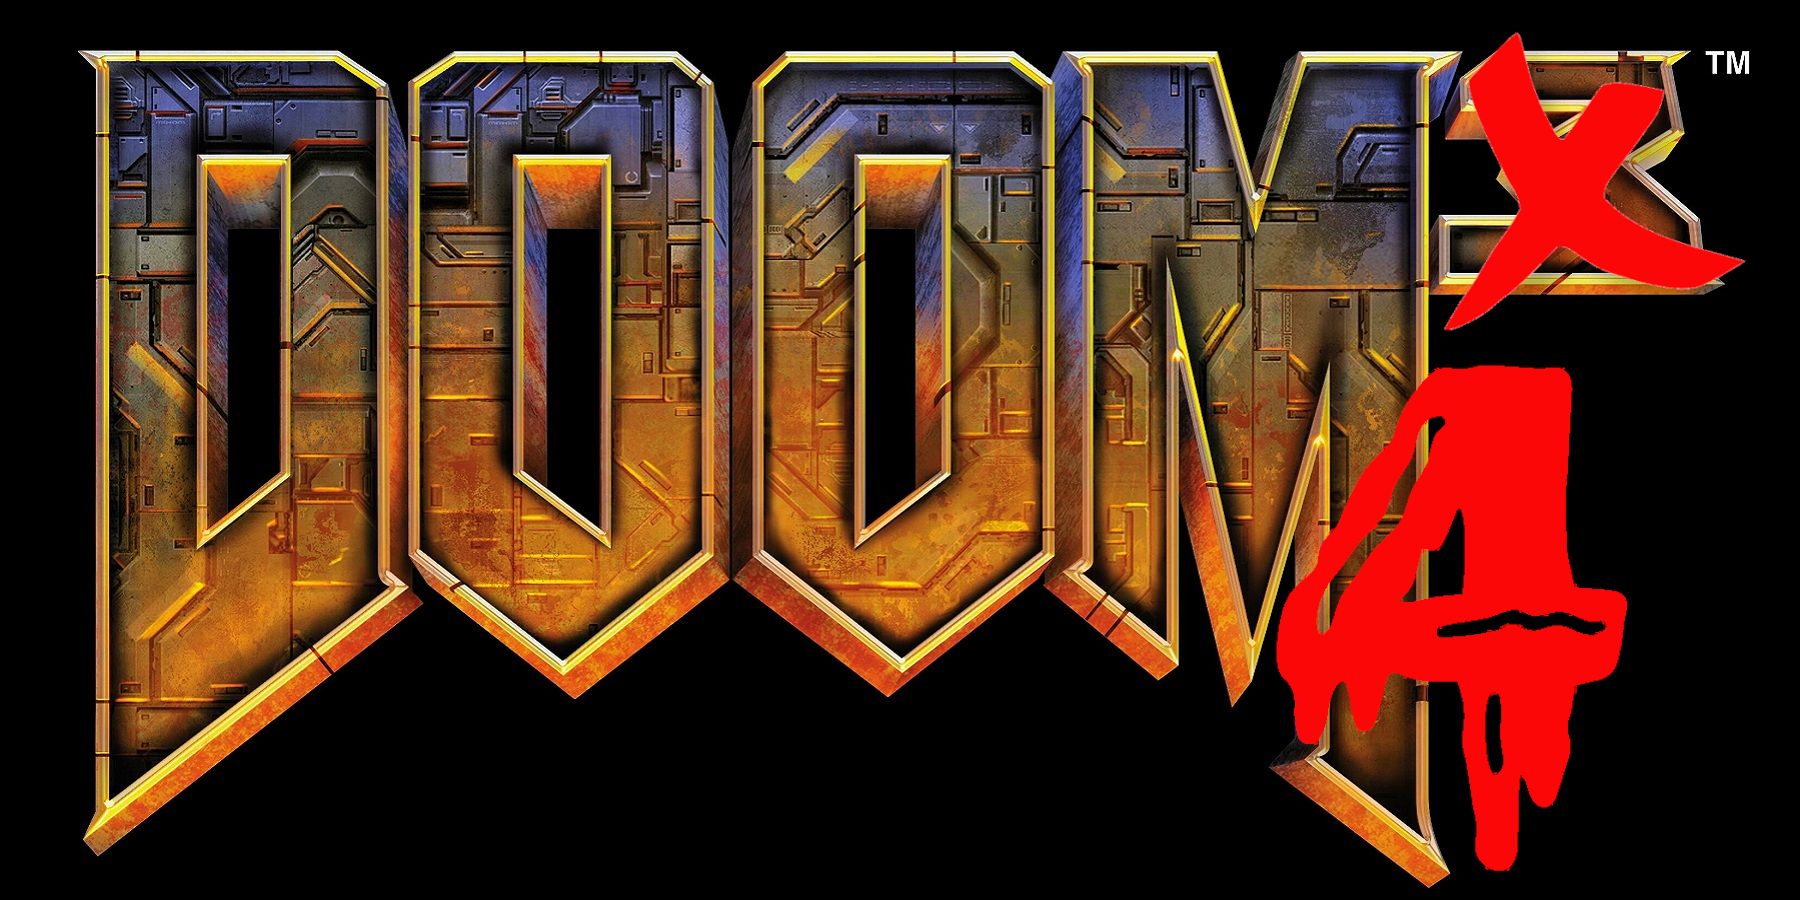 The Doom 3 logo with the 3 crossed out and a bloody 4 written underneath instead.